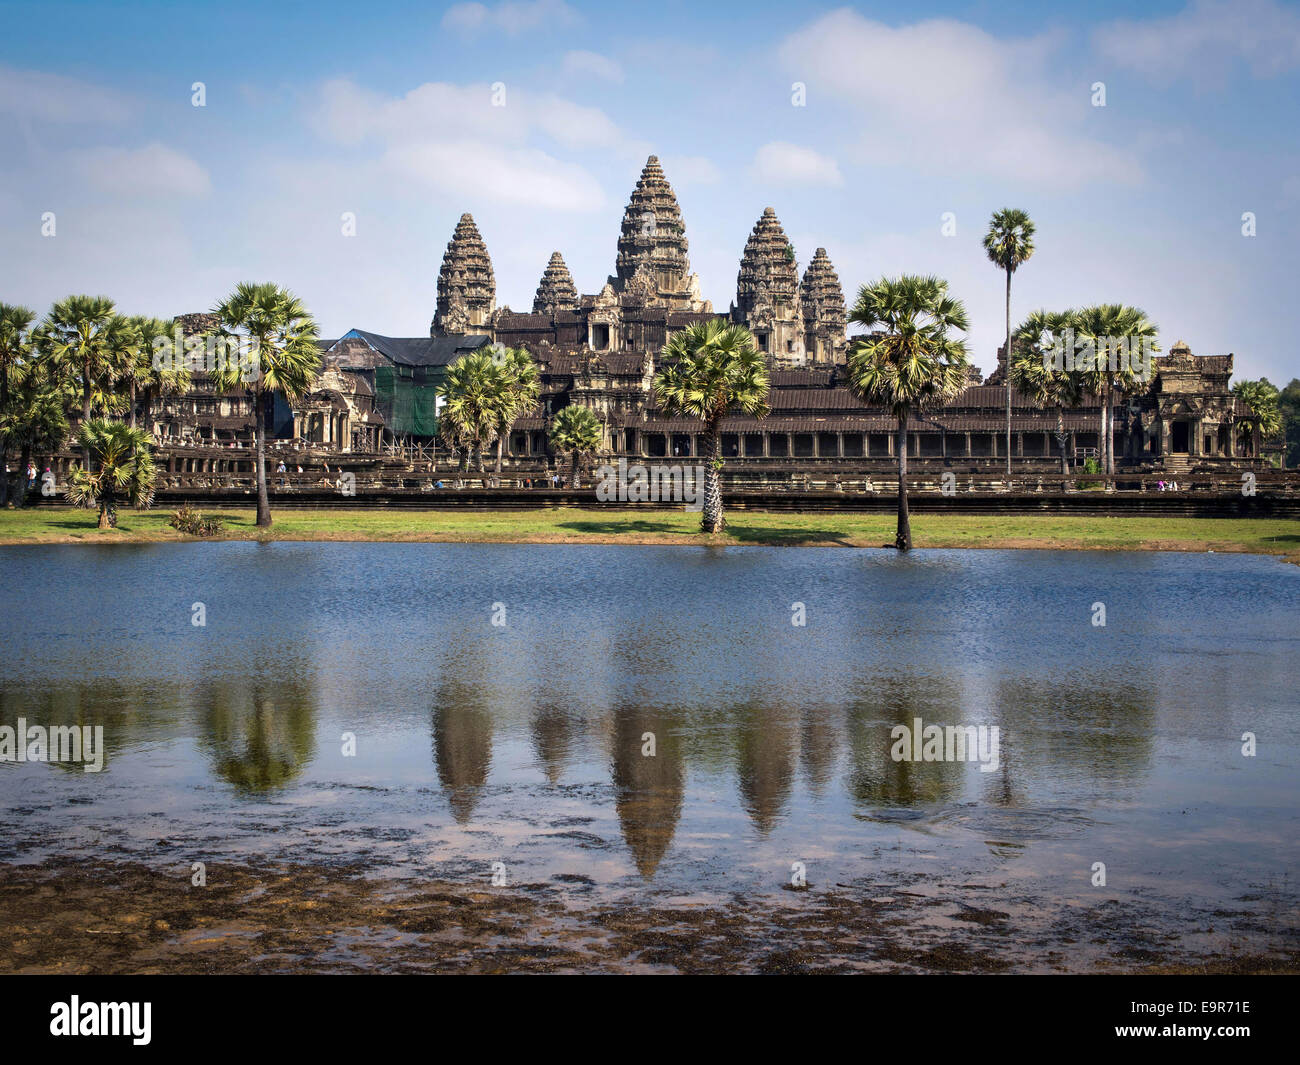 Angkor Wat, the world's largest religious monument, near Siem Reap, Cambodia. Stock Photo